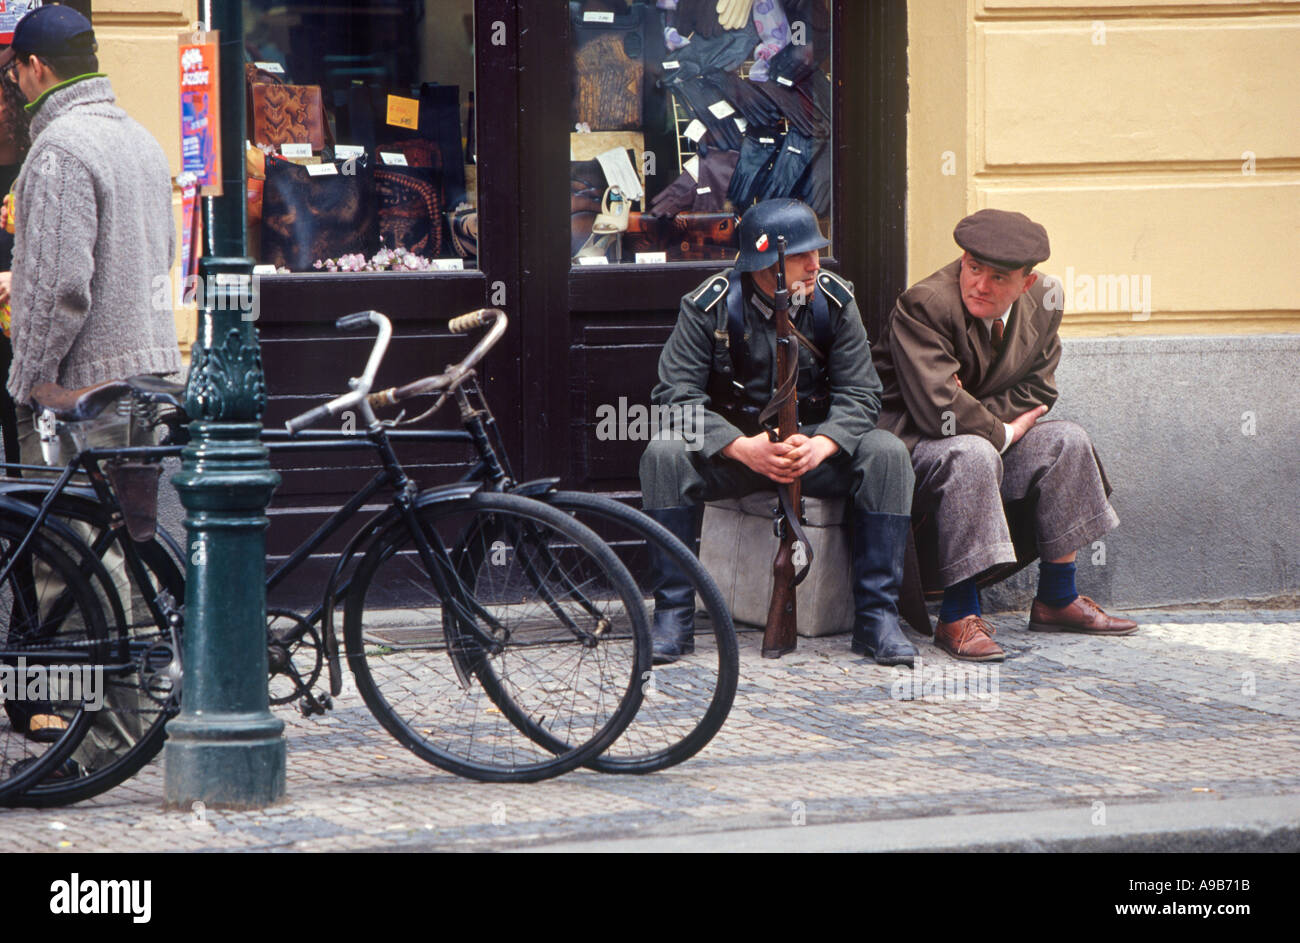 Actors in WWII costumes with old bicycles wait on the sidewalk as a movie is being made in Franz Kafka cafe Prague Stock Photo